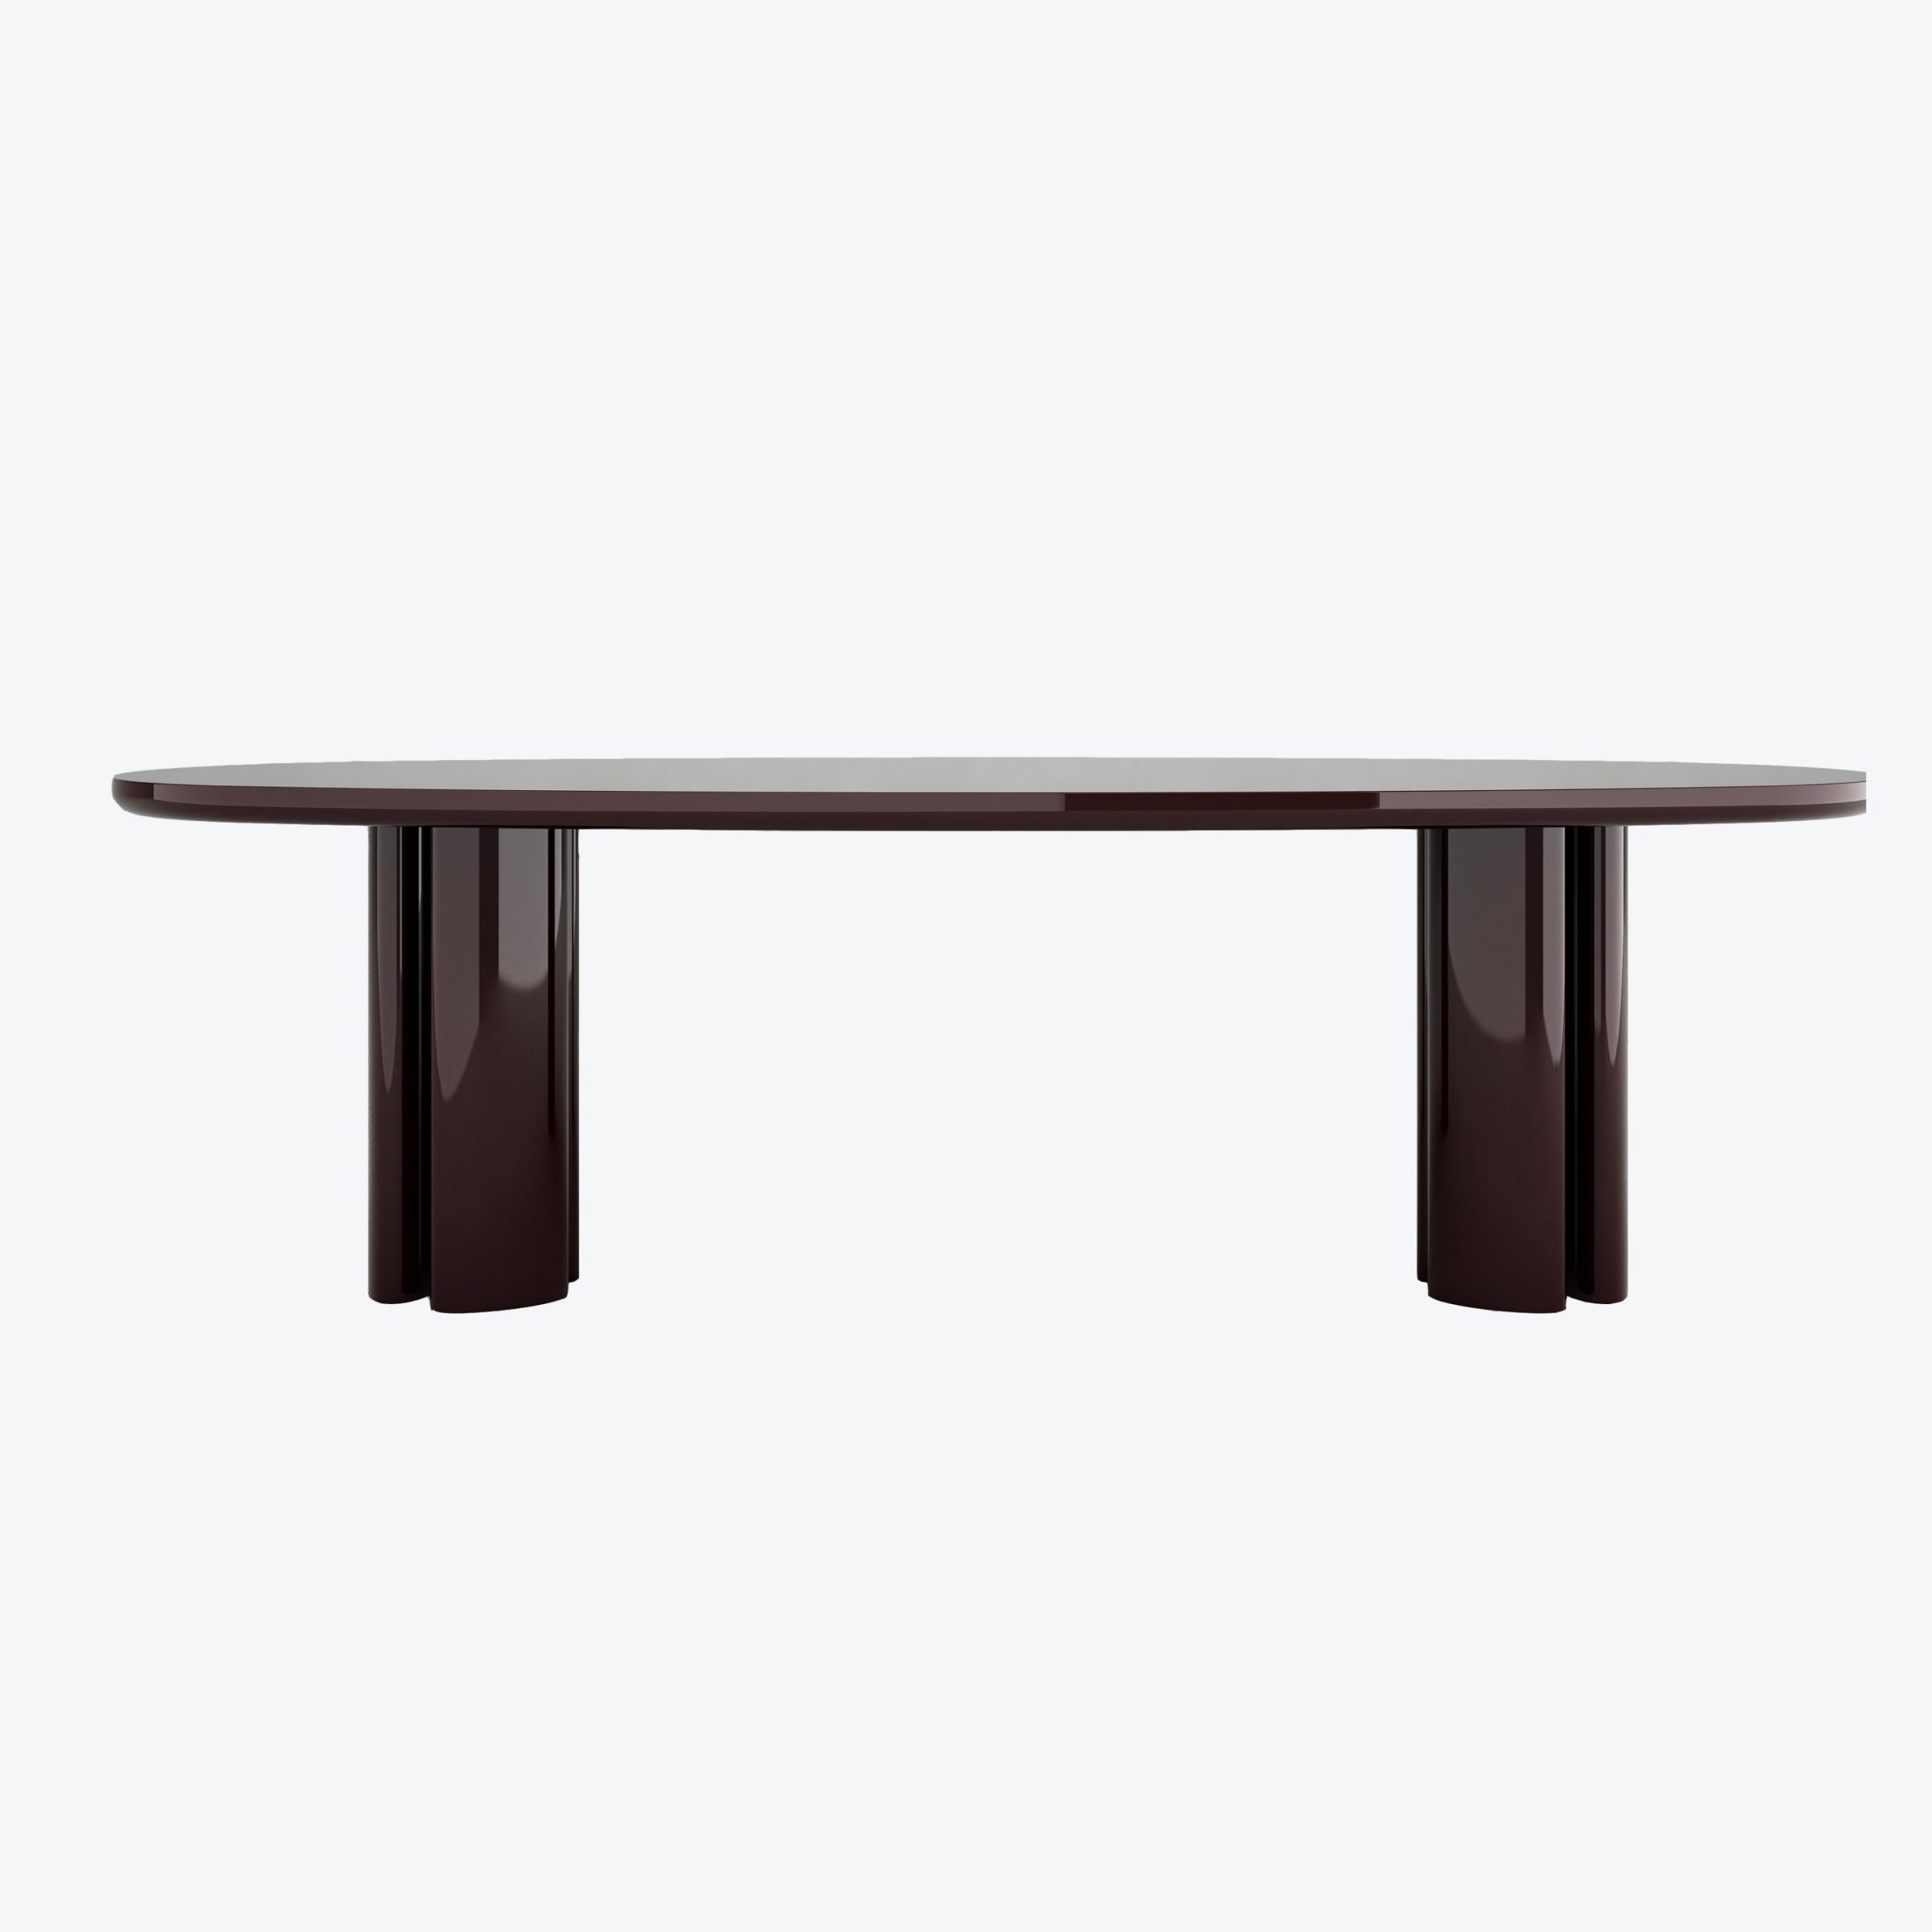 Swan Dining Table Burgundy Collection Invisible The Balzano Lacquer Francesco